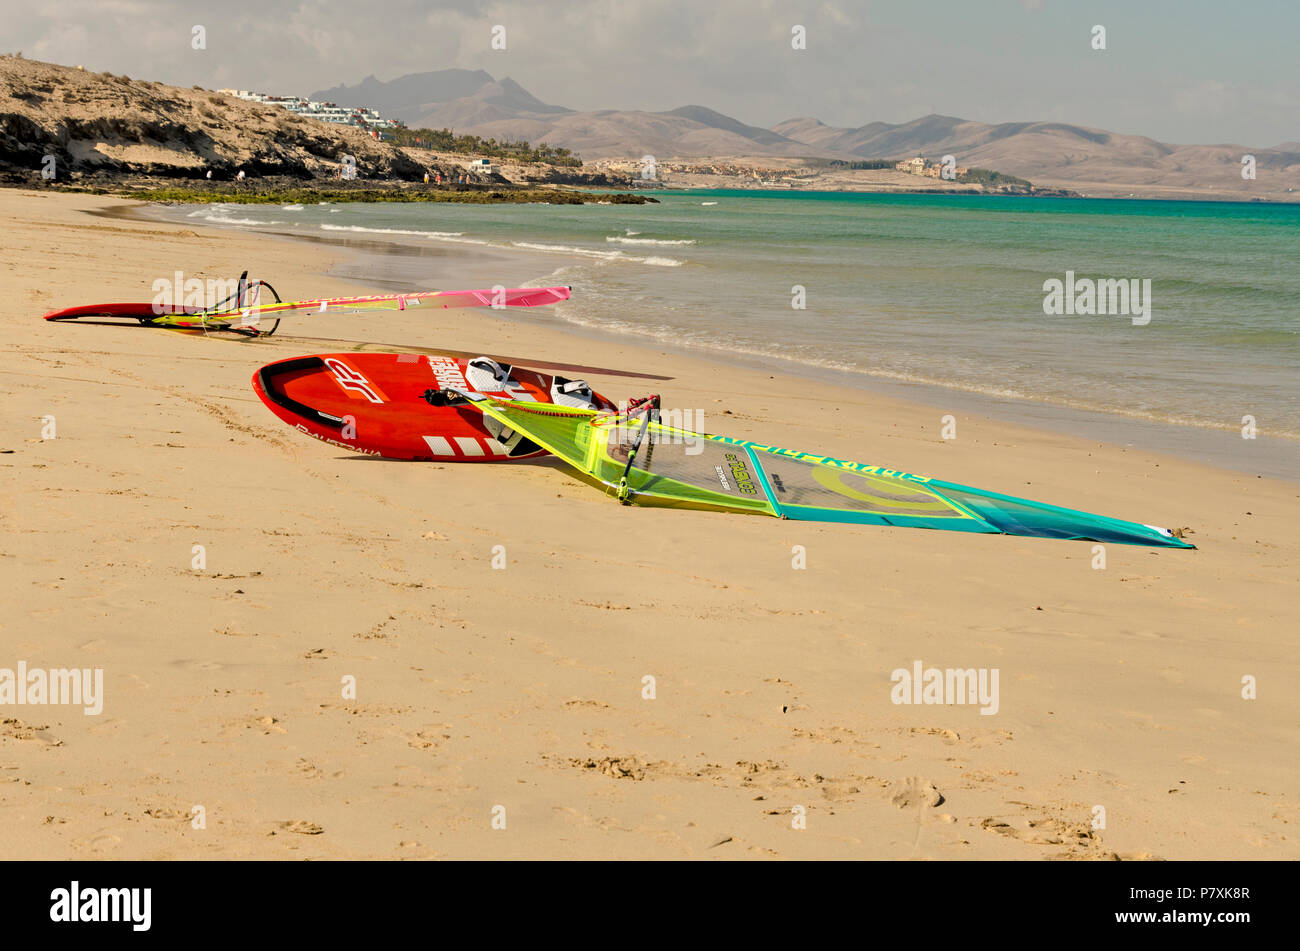 Sotavento beach, Fuerteventura, Canary Islands, Spain: May 26th, 2018. Windsurfing boards lying in the sand on Sotavento beach at low tide Stock Photo